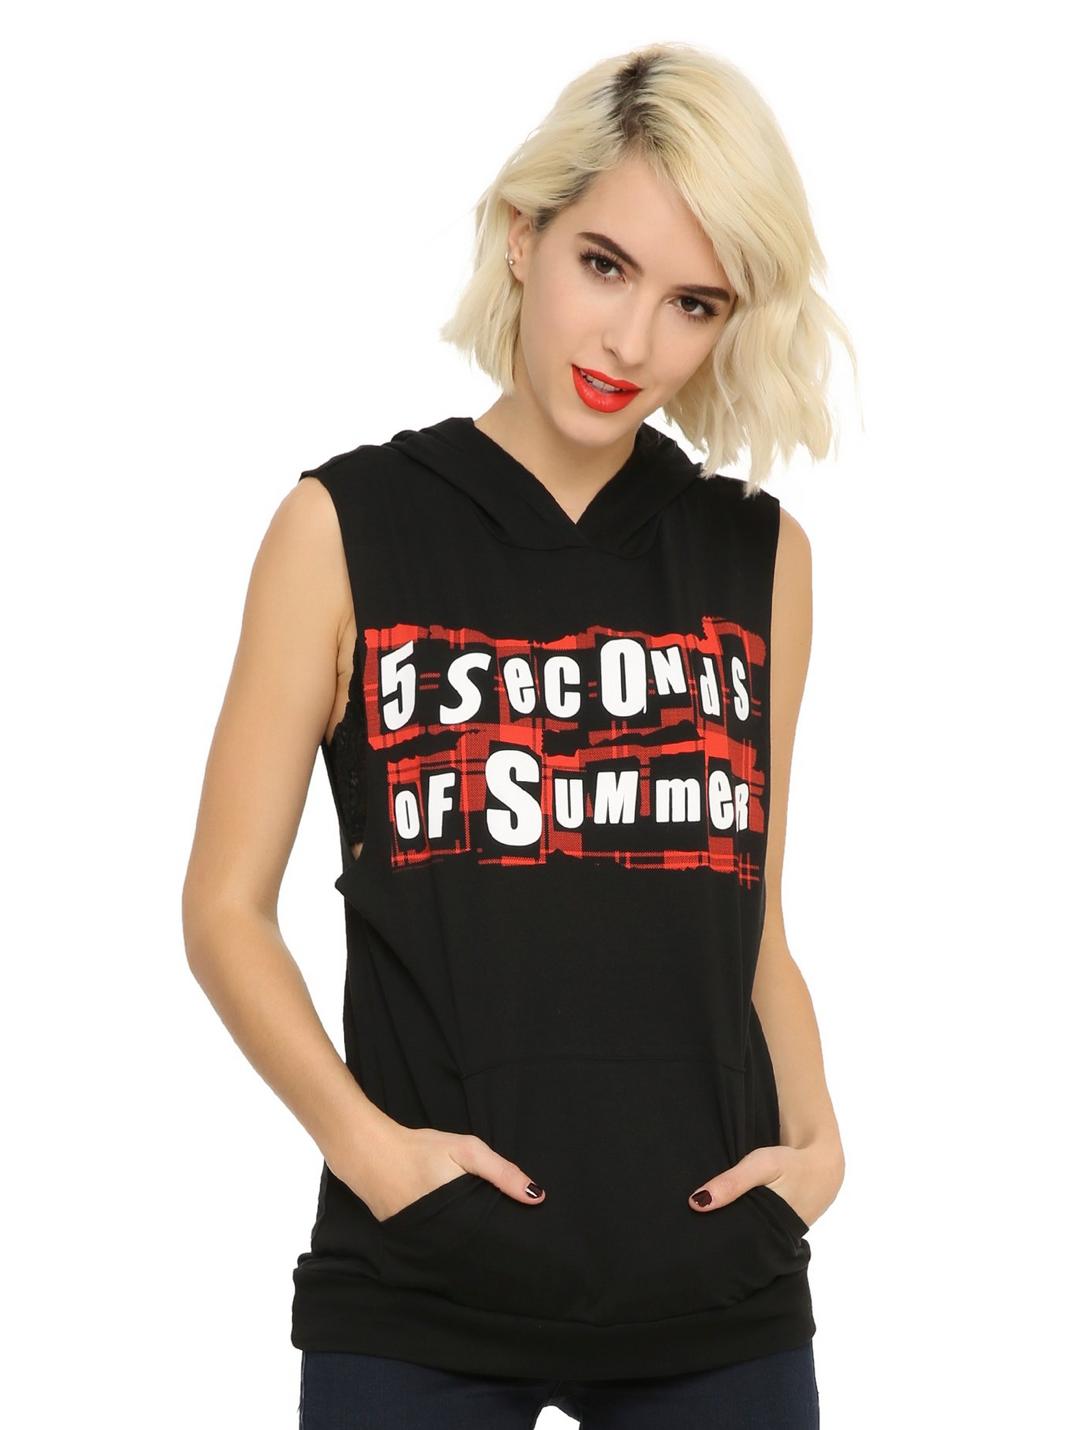 5 Seconds Of Summer Plaid Logo Hooded Girls Muscle Top, BLACK, hi-res